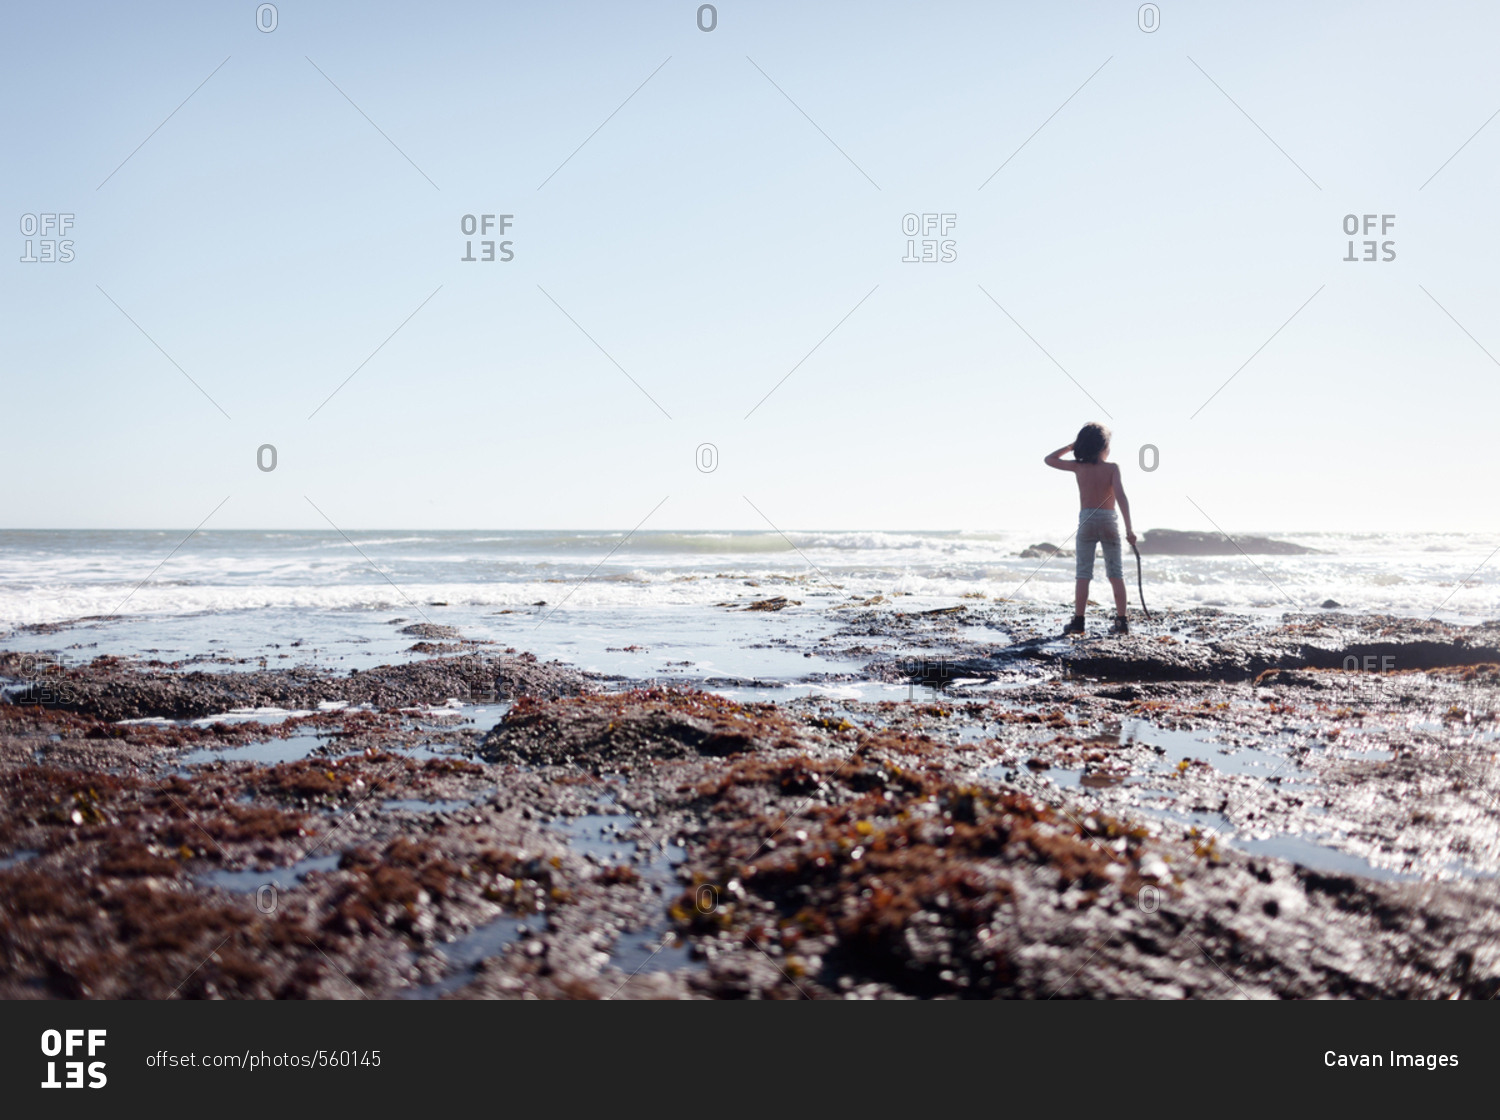 Rear view of shirtless boy holding stick standing at beach against clear sky during sunny day